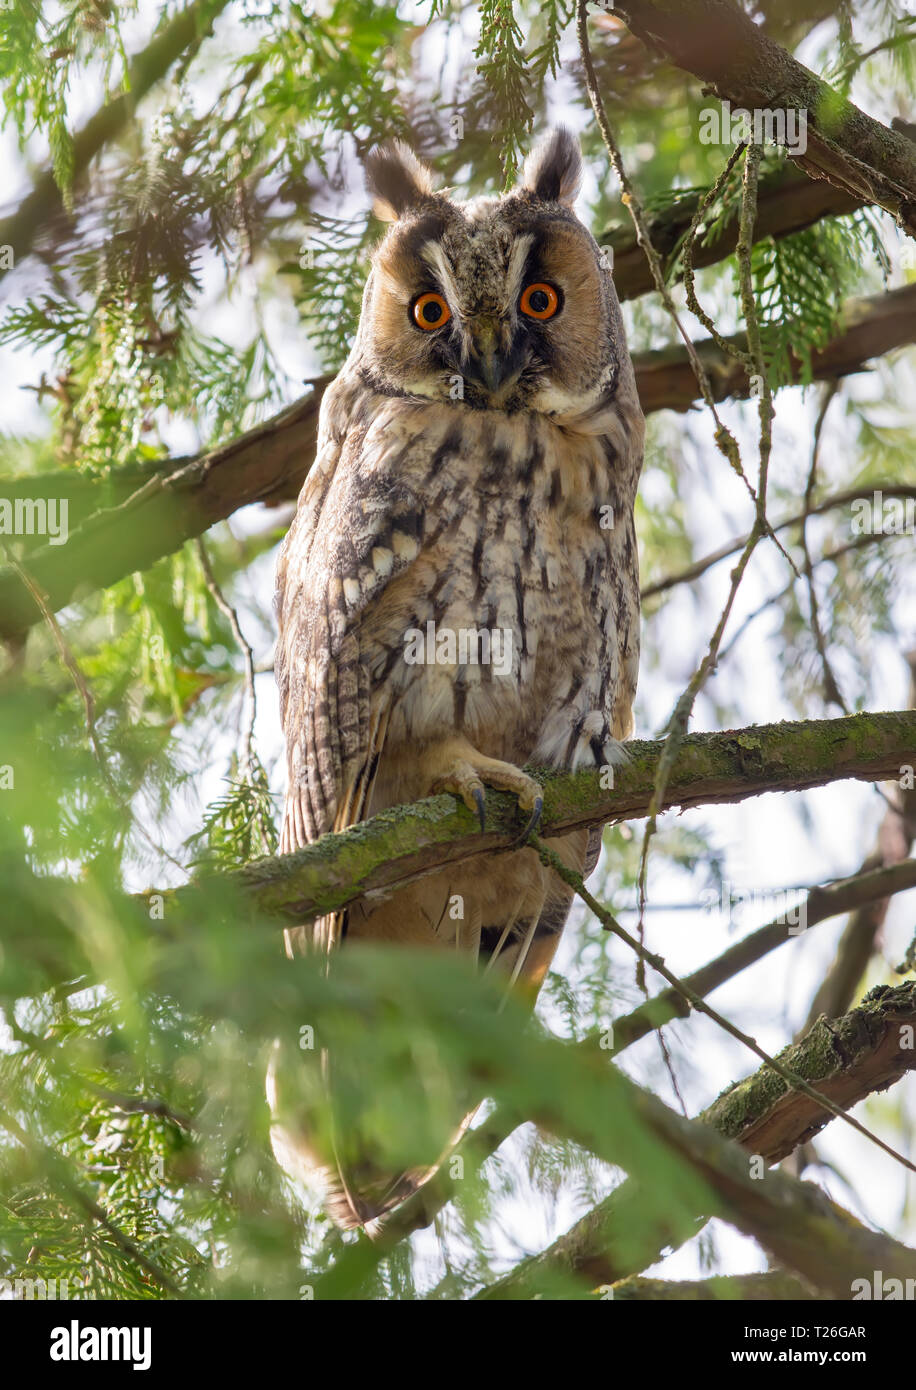 Long-eared owl perched in dense tree branches Stock Photo